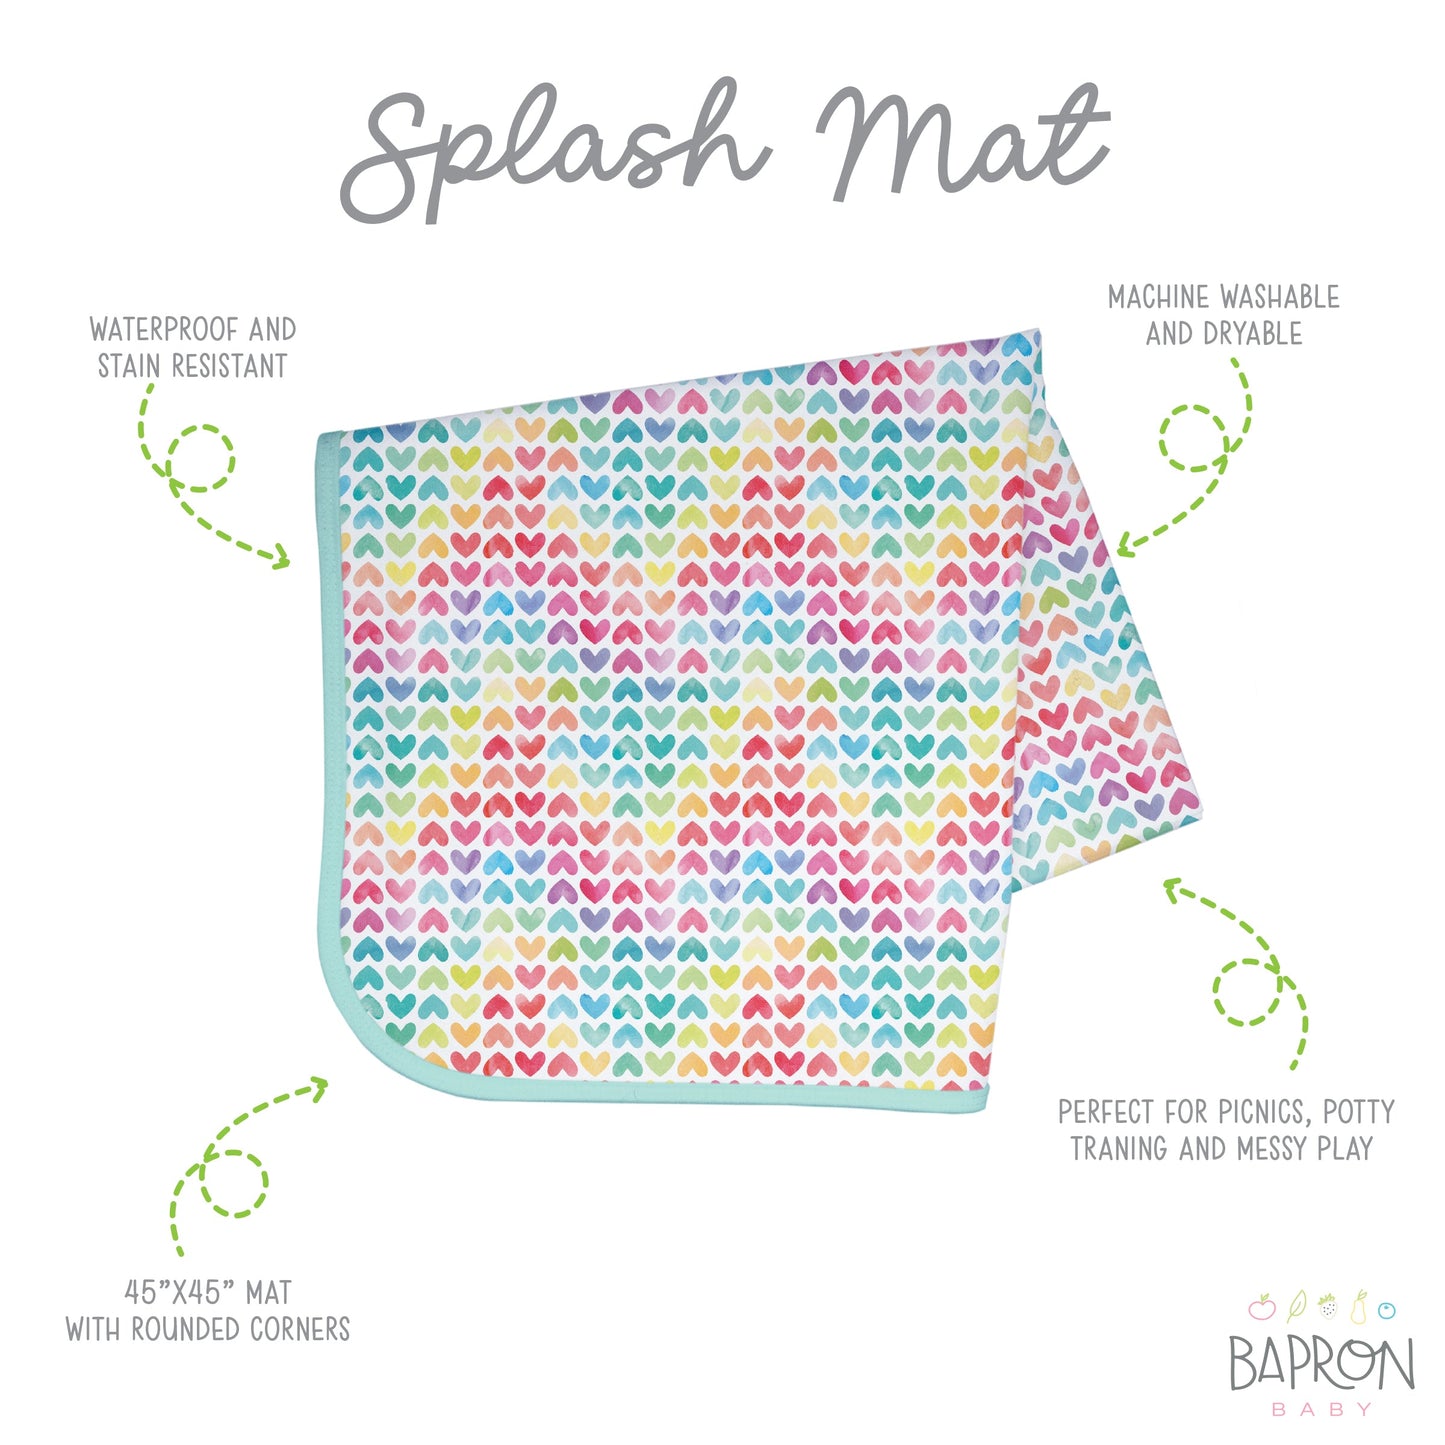 Sweethearts Splash Mat - A Waterproof Catch-All for Highchair Spills and More! - WERONE